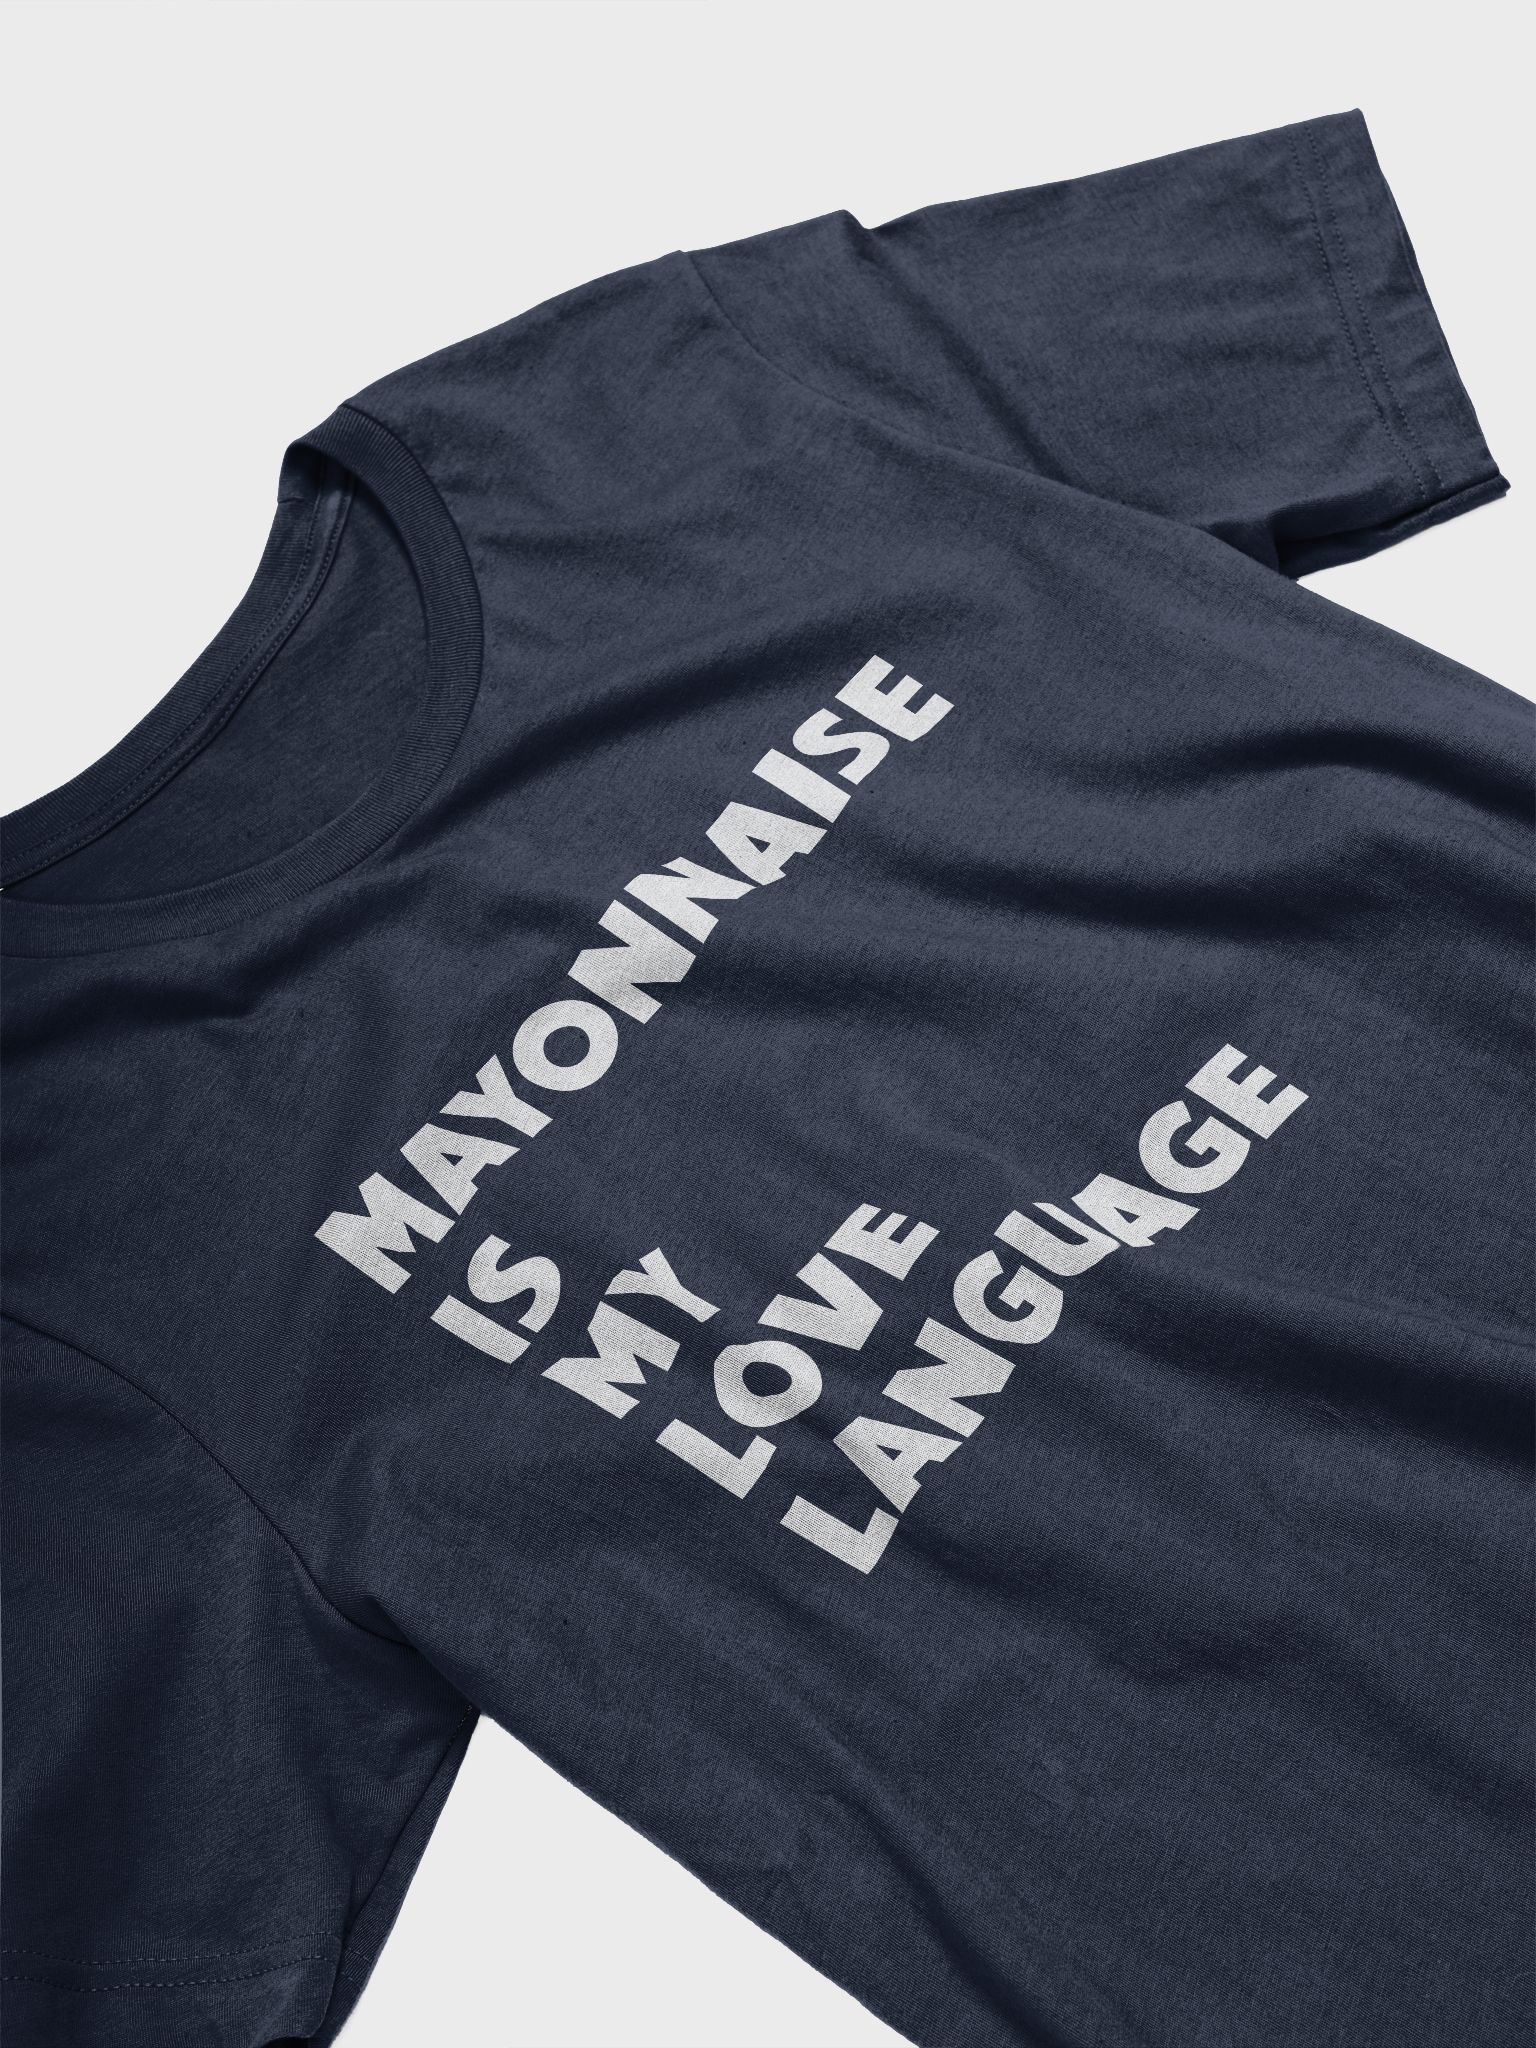 Giving Wedgies Is My Love Language T-shirt